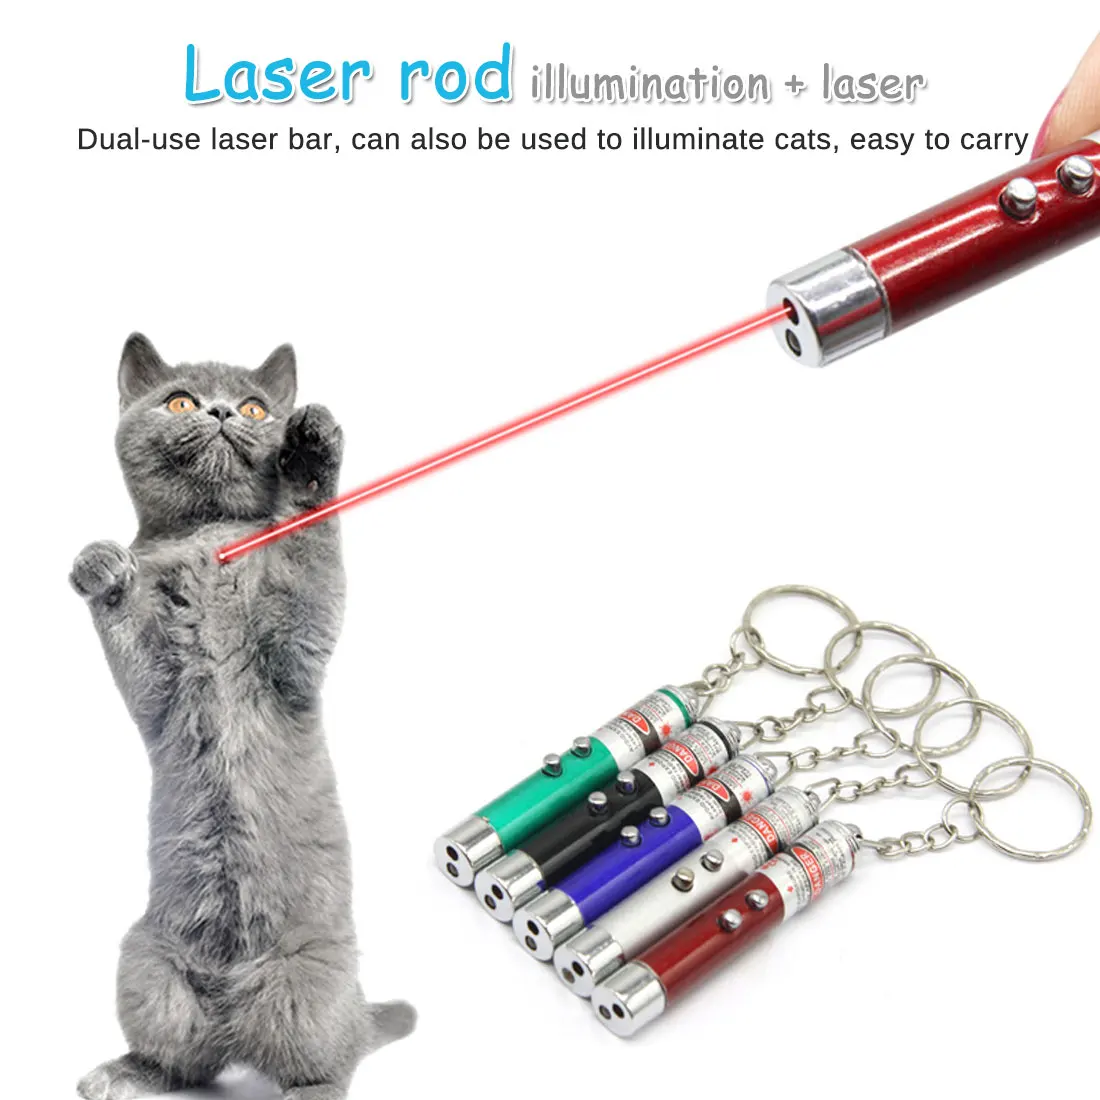 Details about   Lazer Pointer High Power Laser Sight Pointer 5MW High Power Funny Cat Pet Toy 